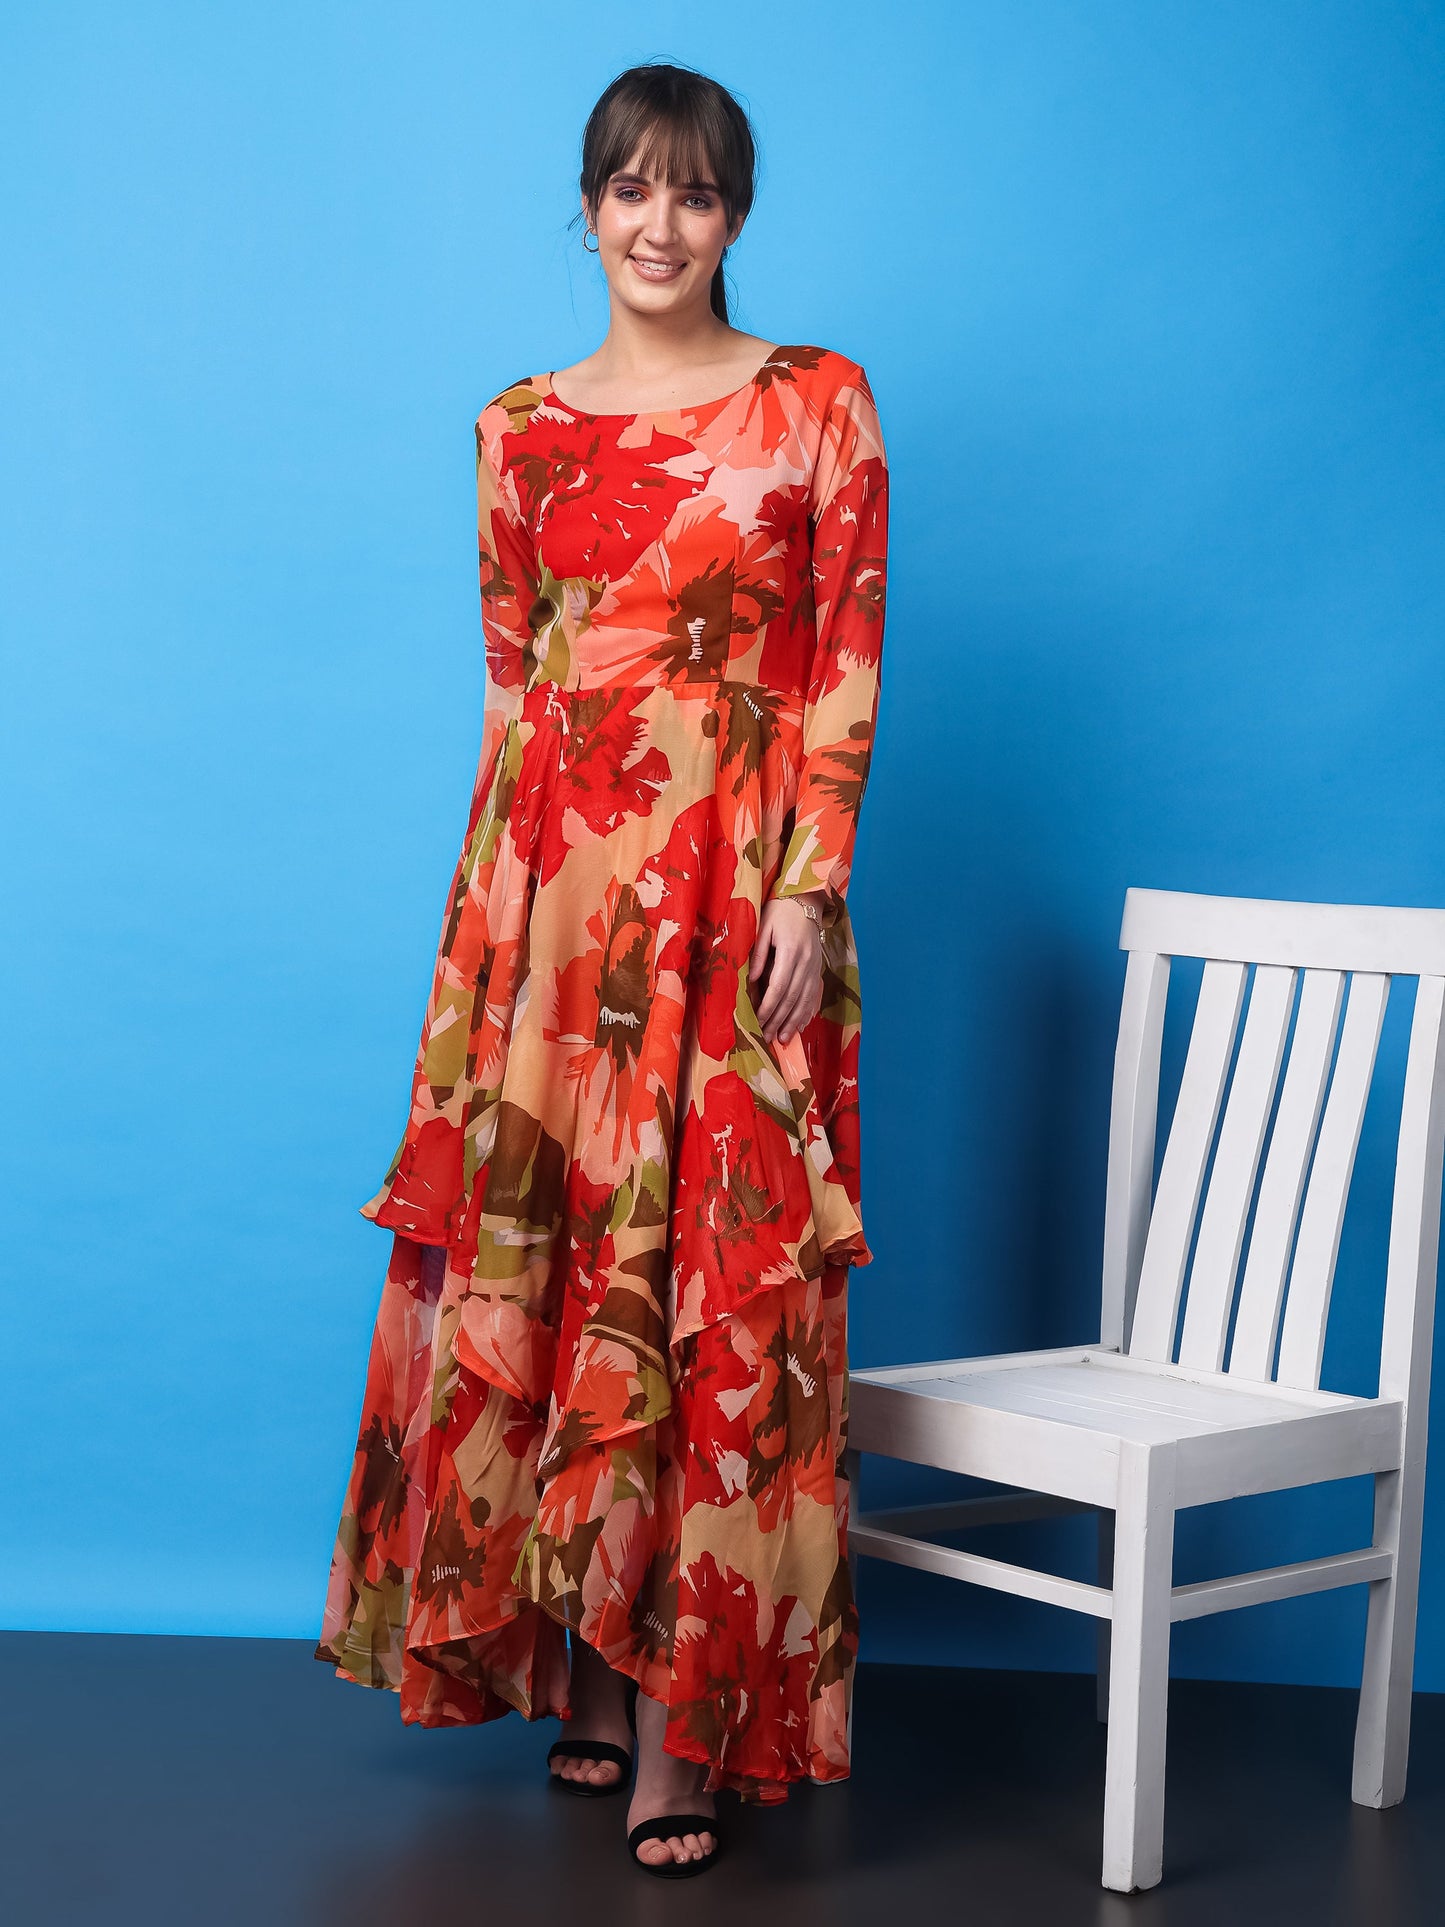 SCORPIUS Floral Printed Layered Fit Flare Maxi Dress